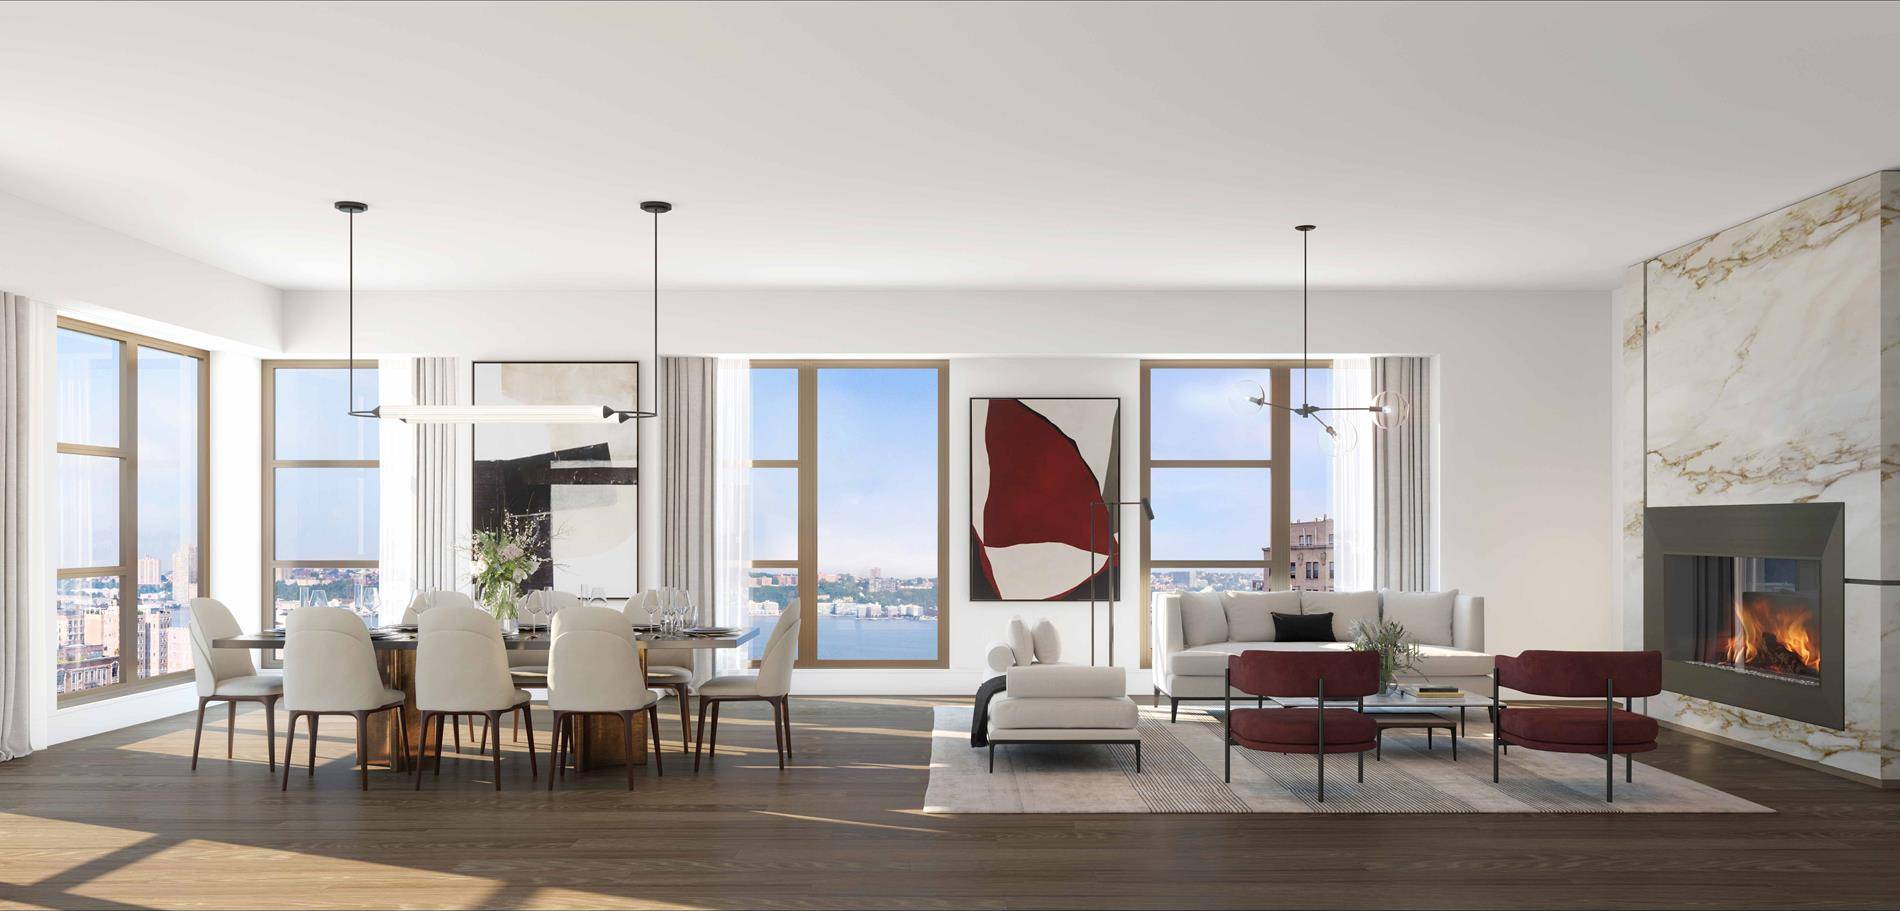 Penthouse B is an exceptional home offering 3, 059 sf interior and 1, 079 sf exterior living space with 4 bedrooms and 3.